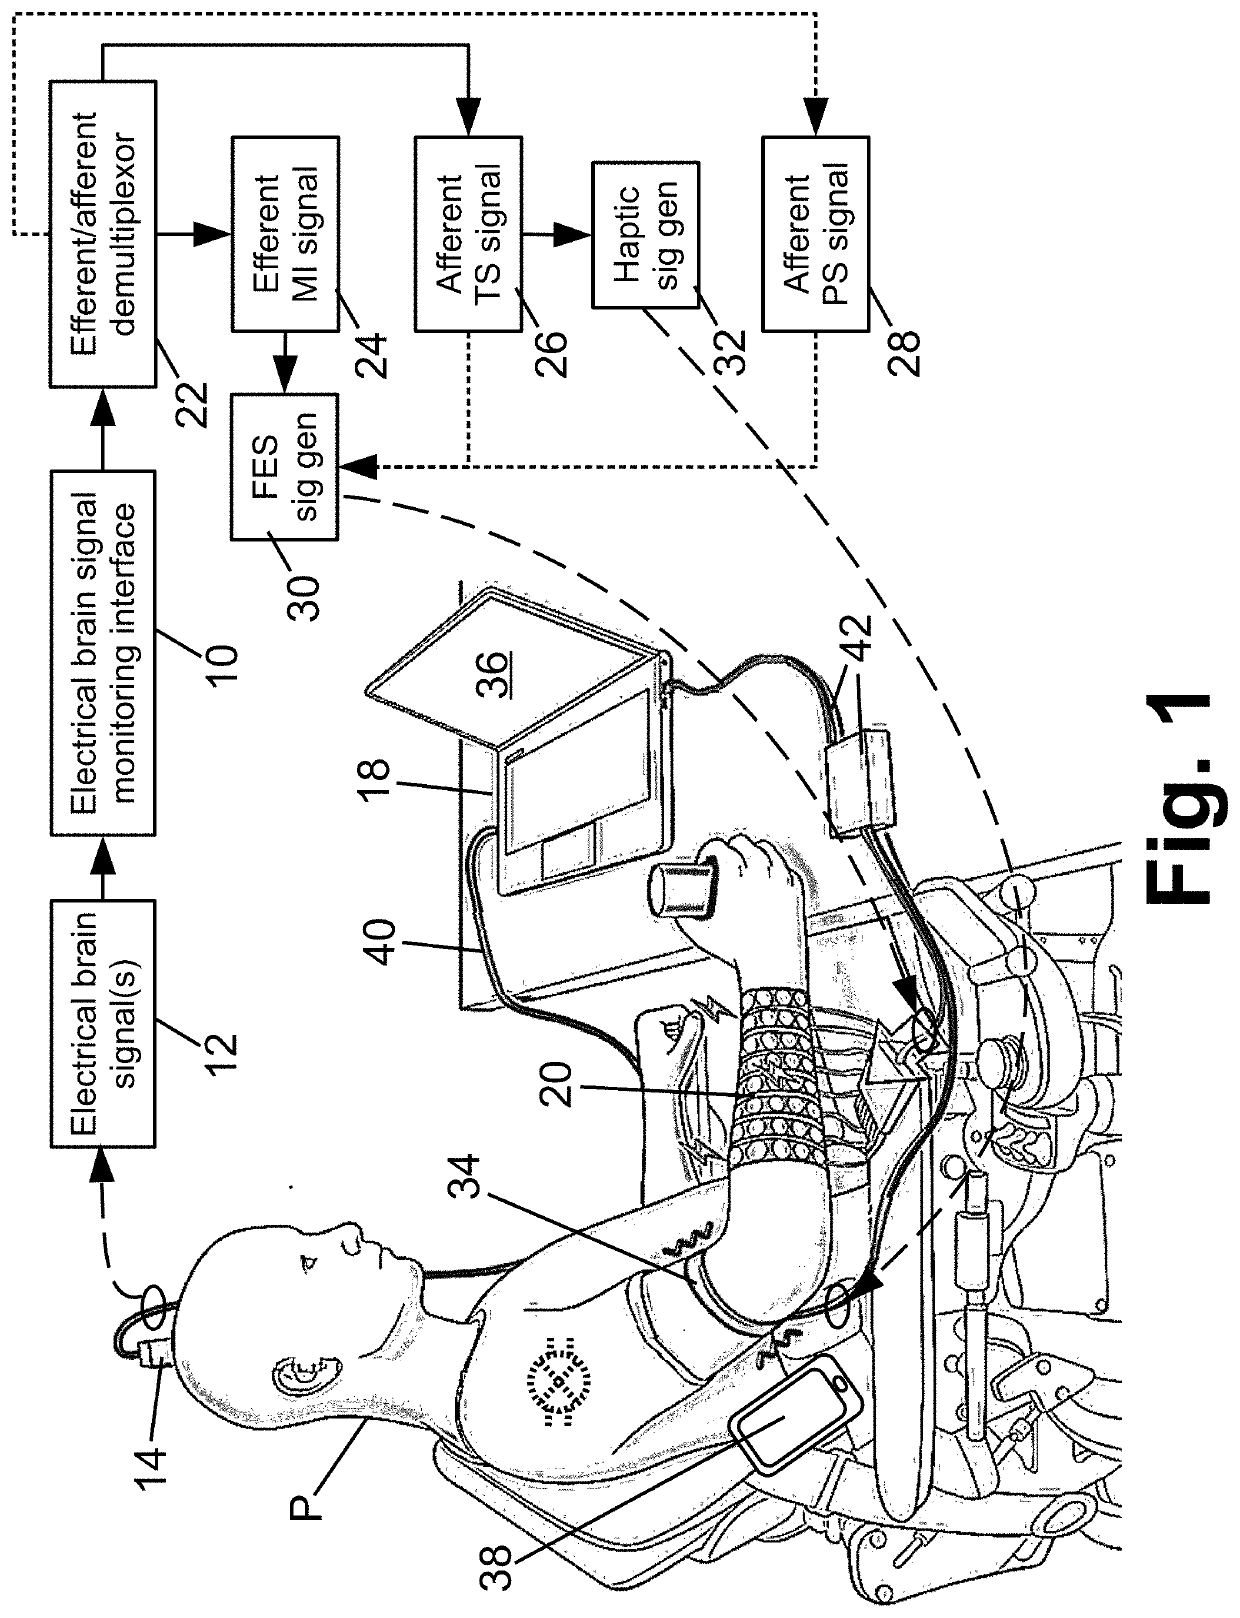 Motor function neural control interface for spinal cord injury patients